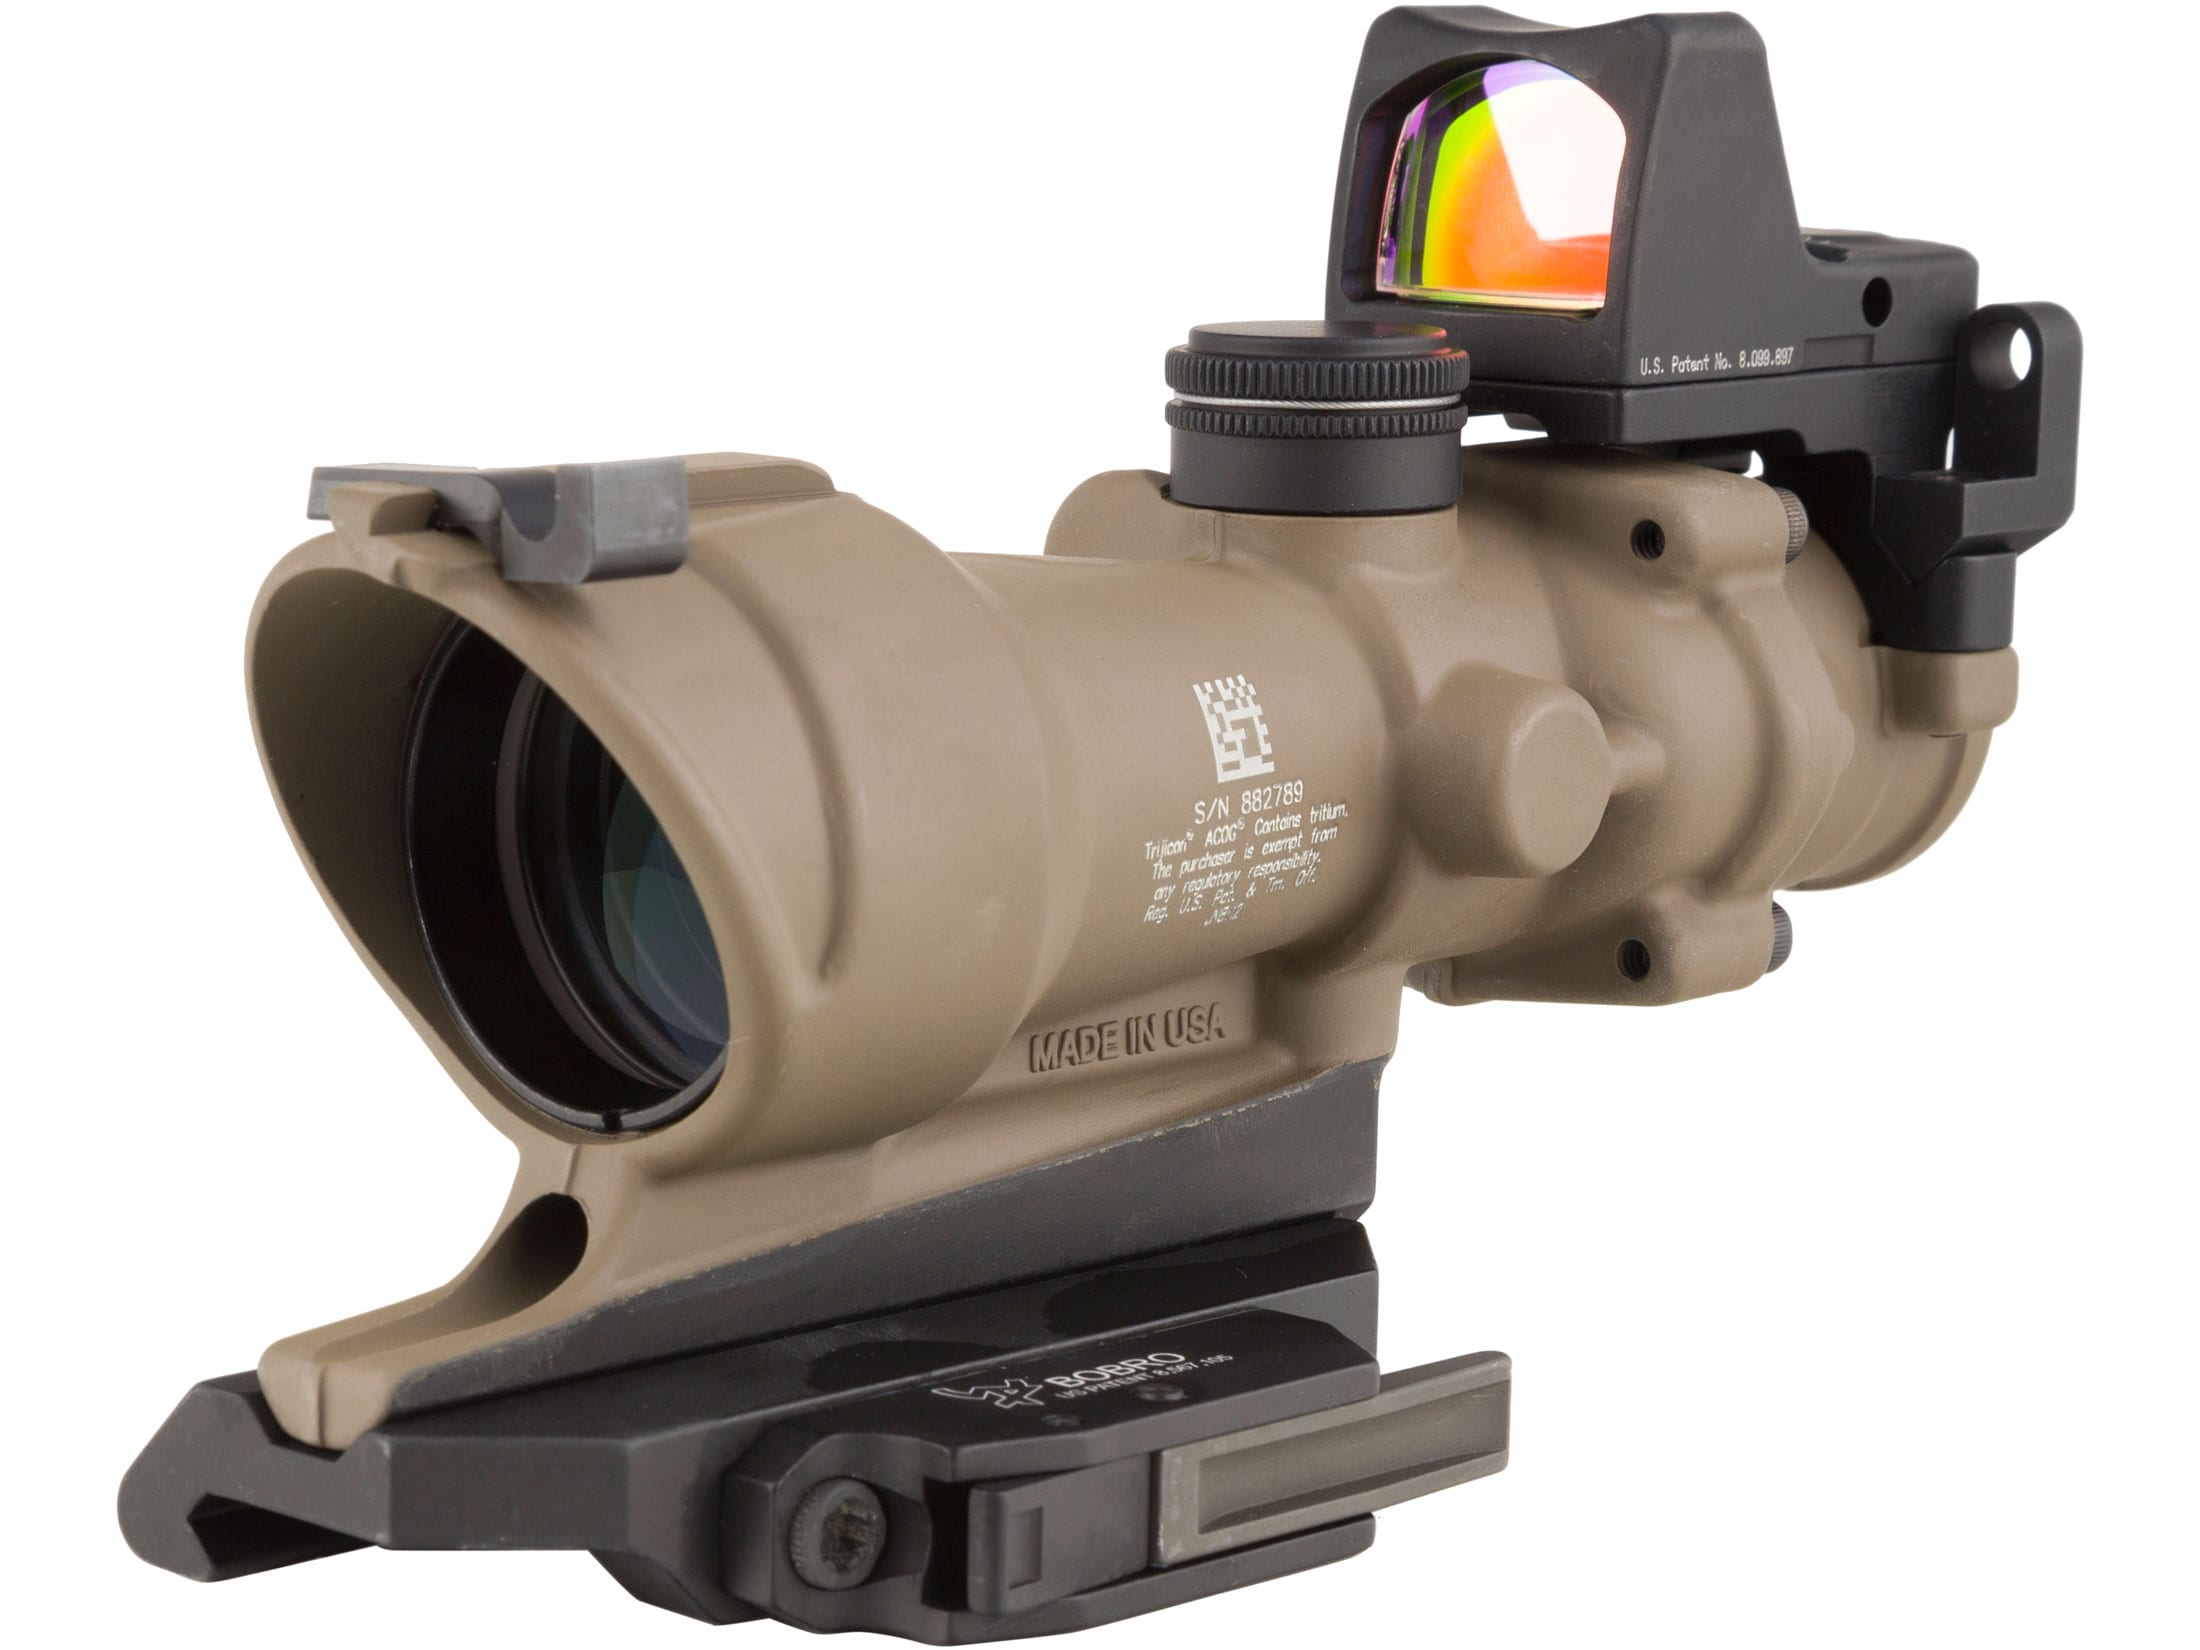 The Trijicon ACOG ECOS is the ultimate sight for both Close Quarter battle ...